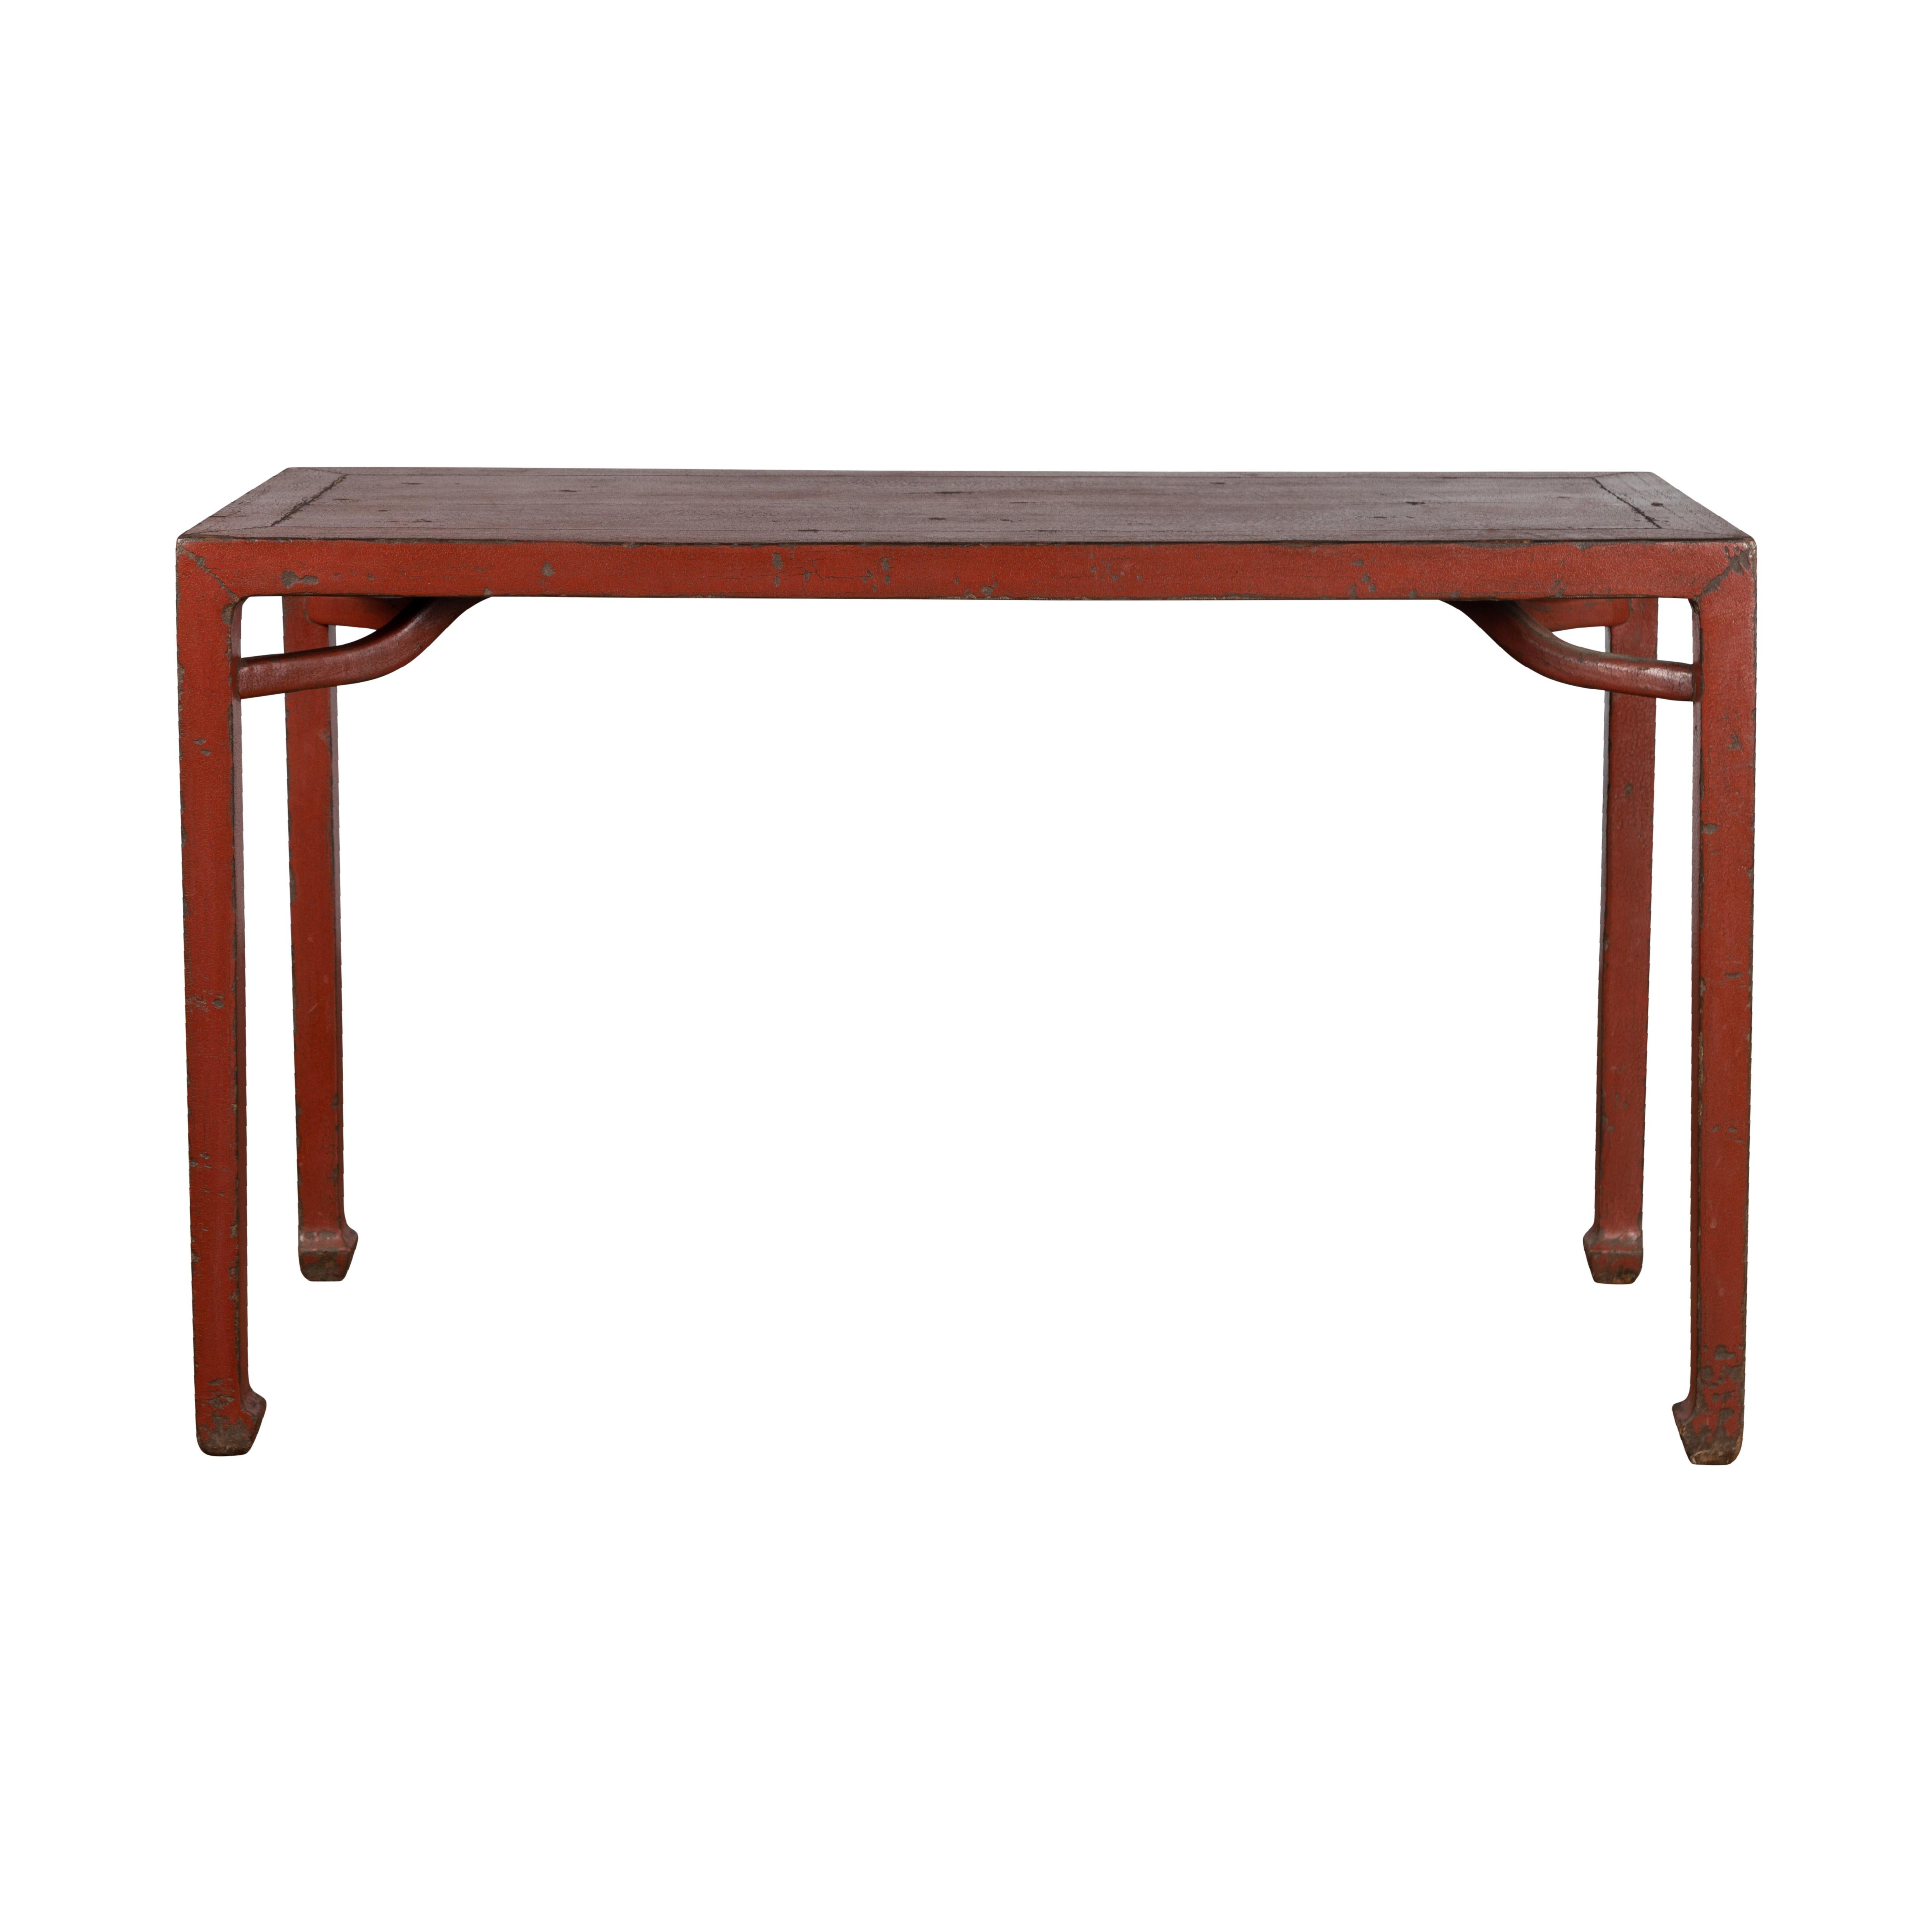 Chinese Qing Dynasty 19th Century Wood Console Table with Original Red Lacquer For Sale